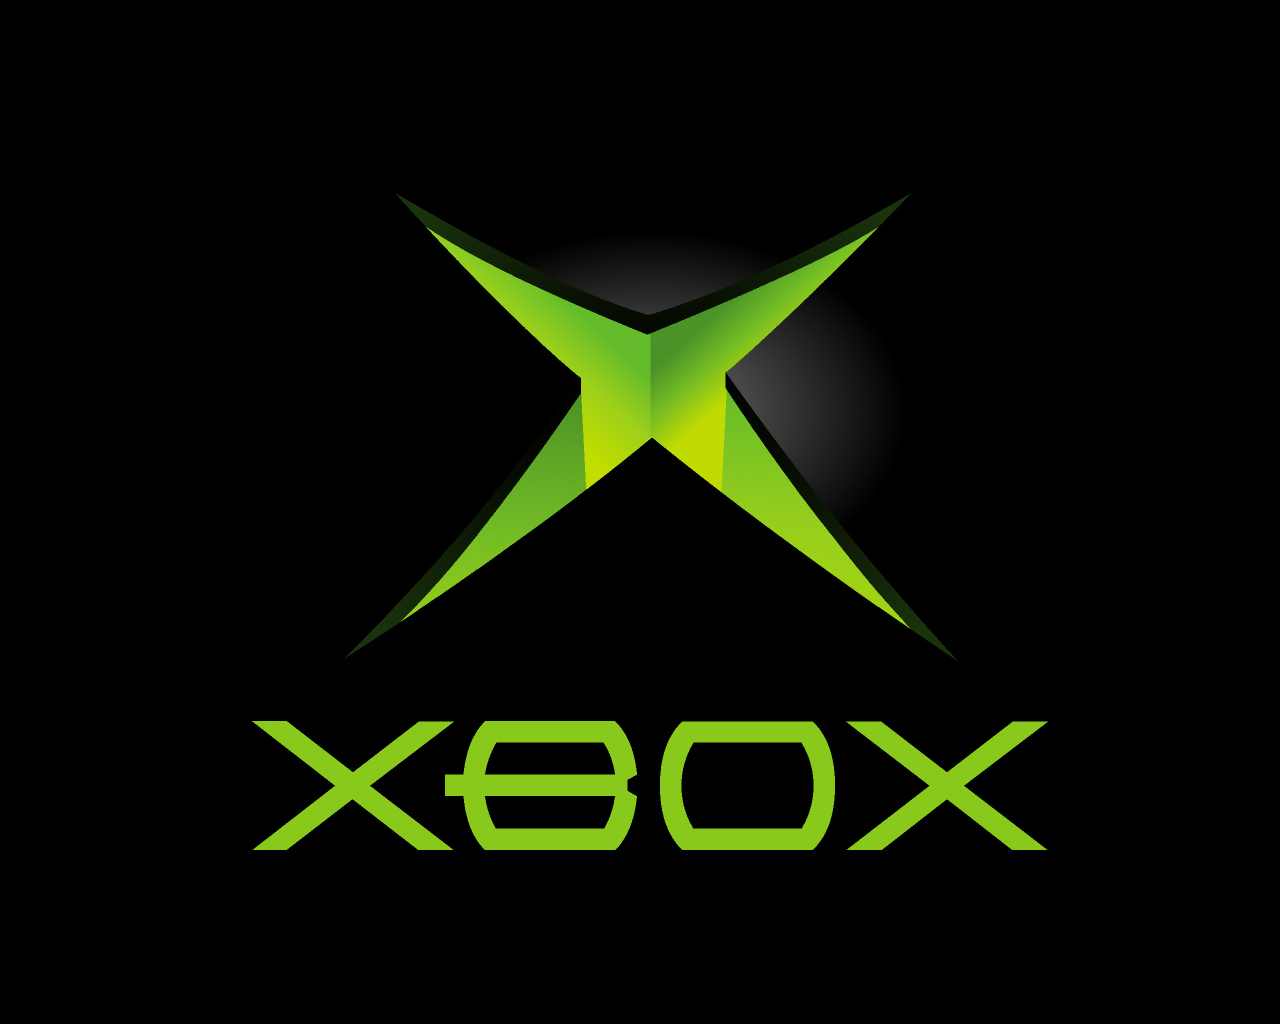 XBox Logo by chriswoods on